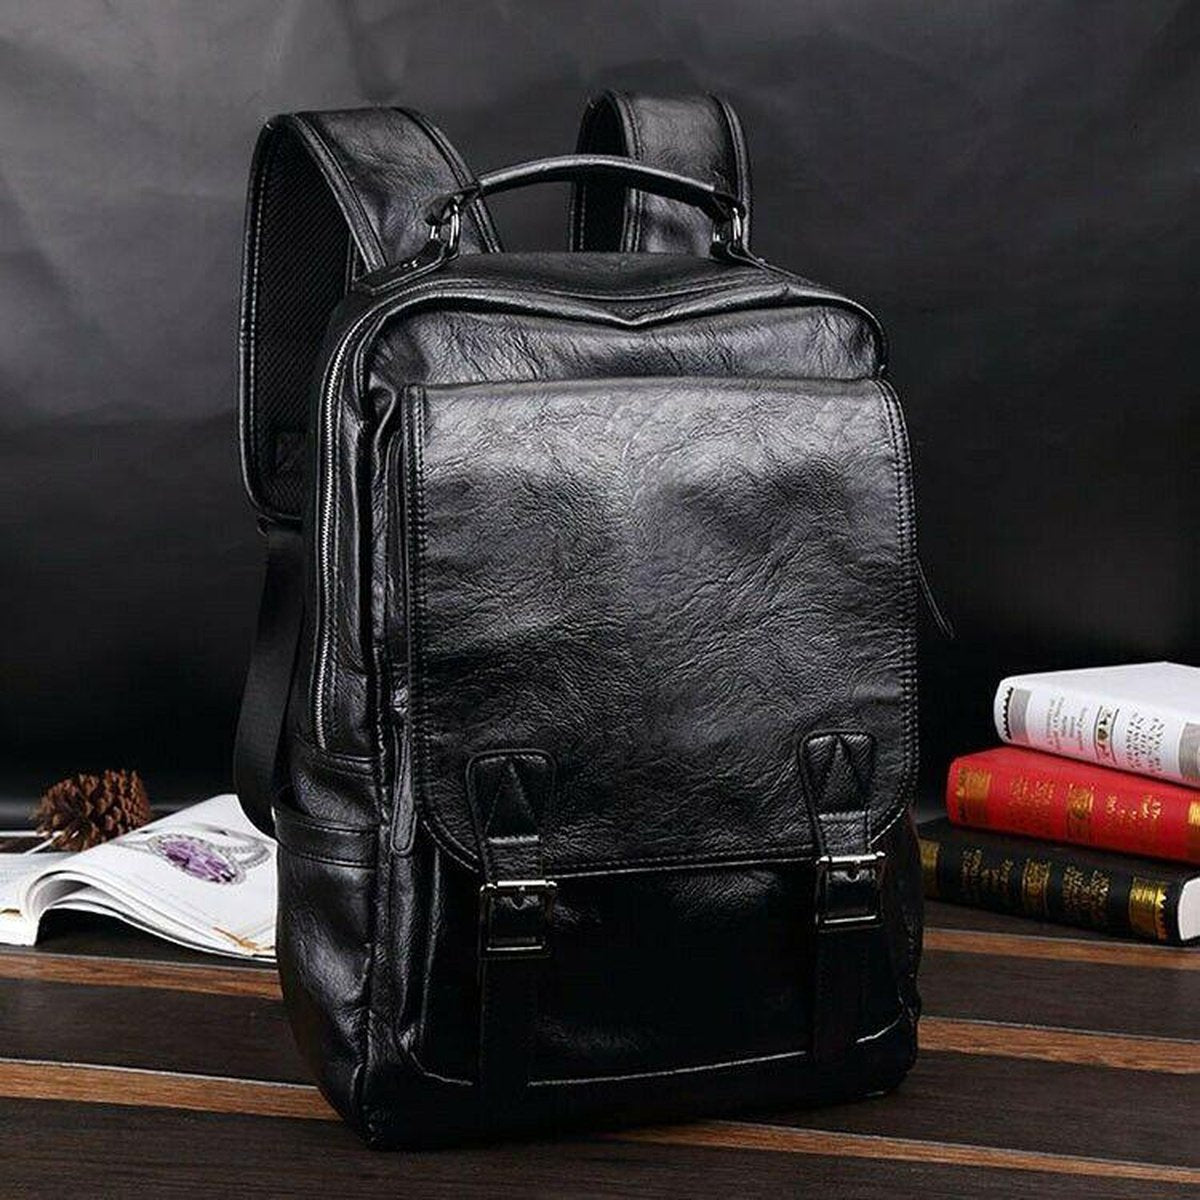 MROYALE™ Men's Leather iPad/Tablet Backpack - Travel, School, Day Trips backpack MRoyale™ Fashion 